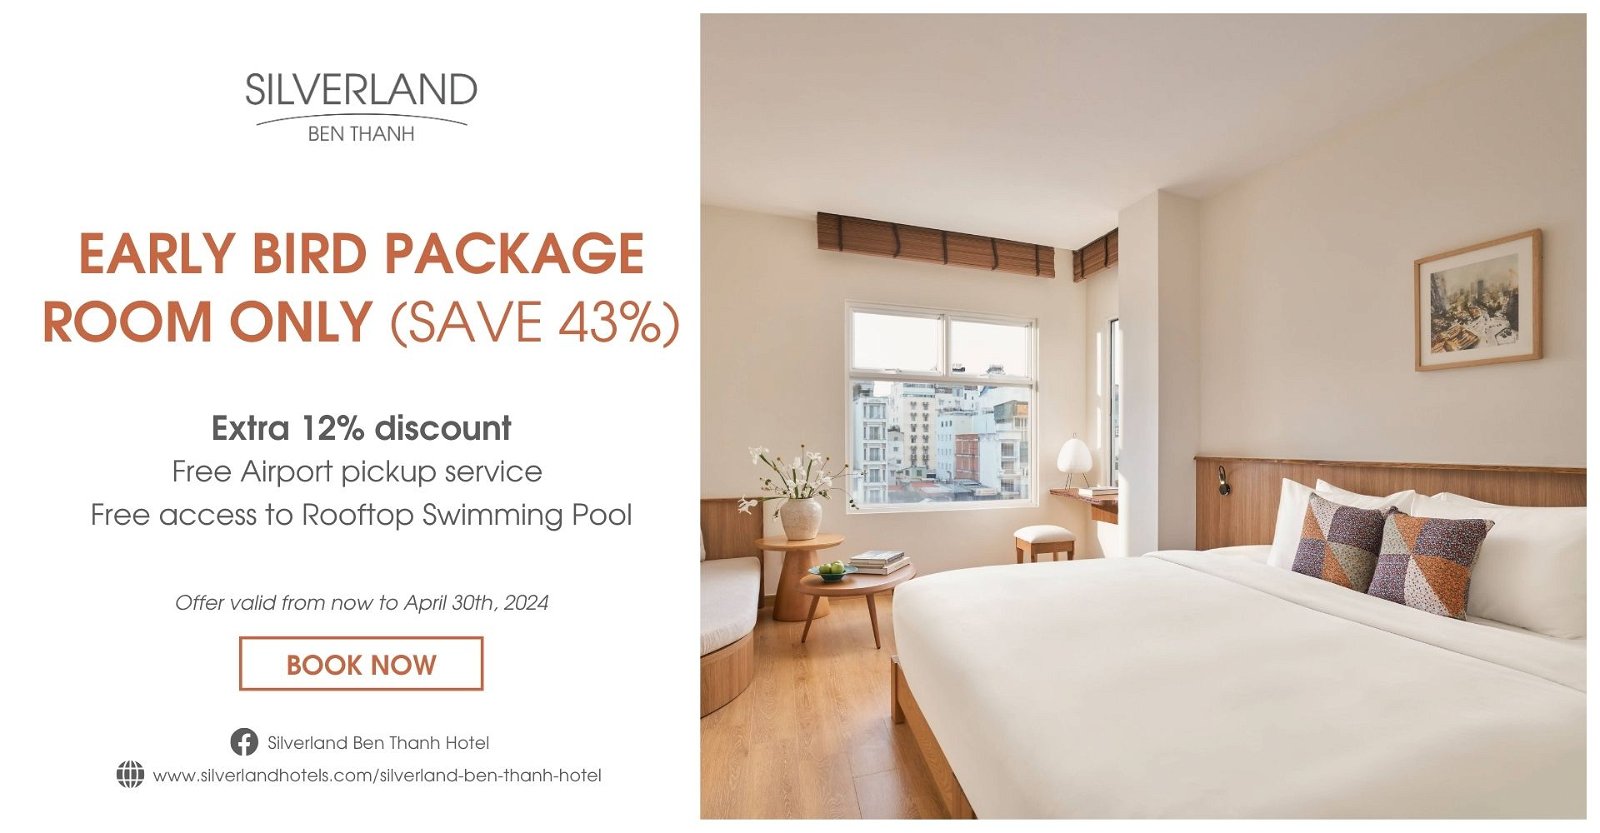 SILVERLAND BEN THANH – EARLY BIRD PACKAGE (ROOM ONLY) (SAVE 43%)